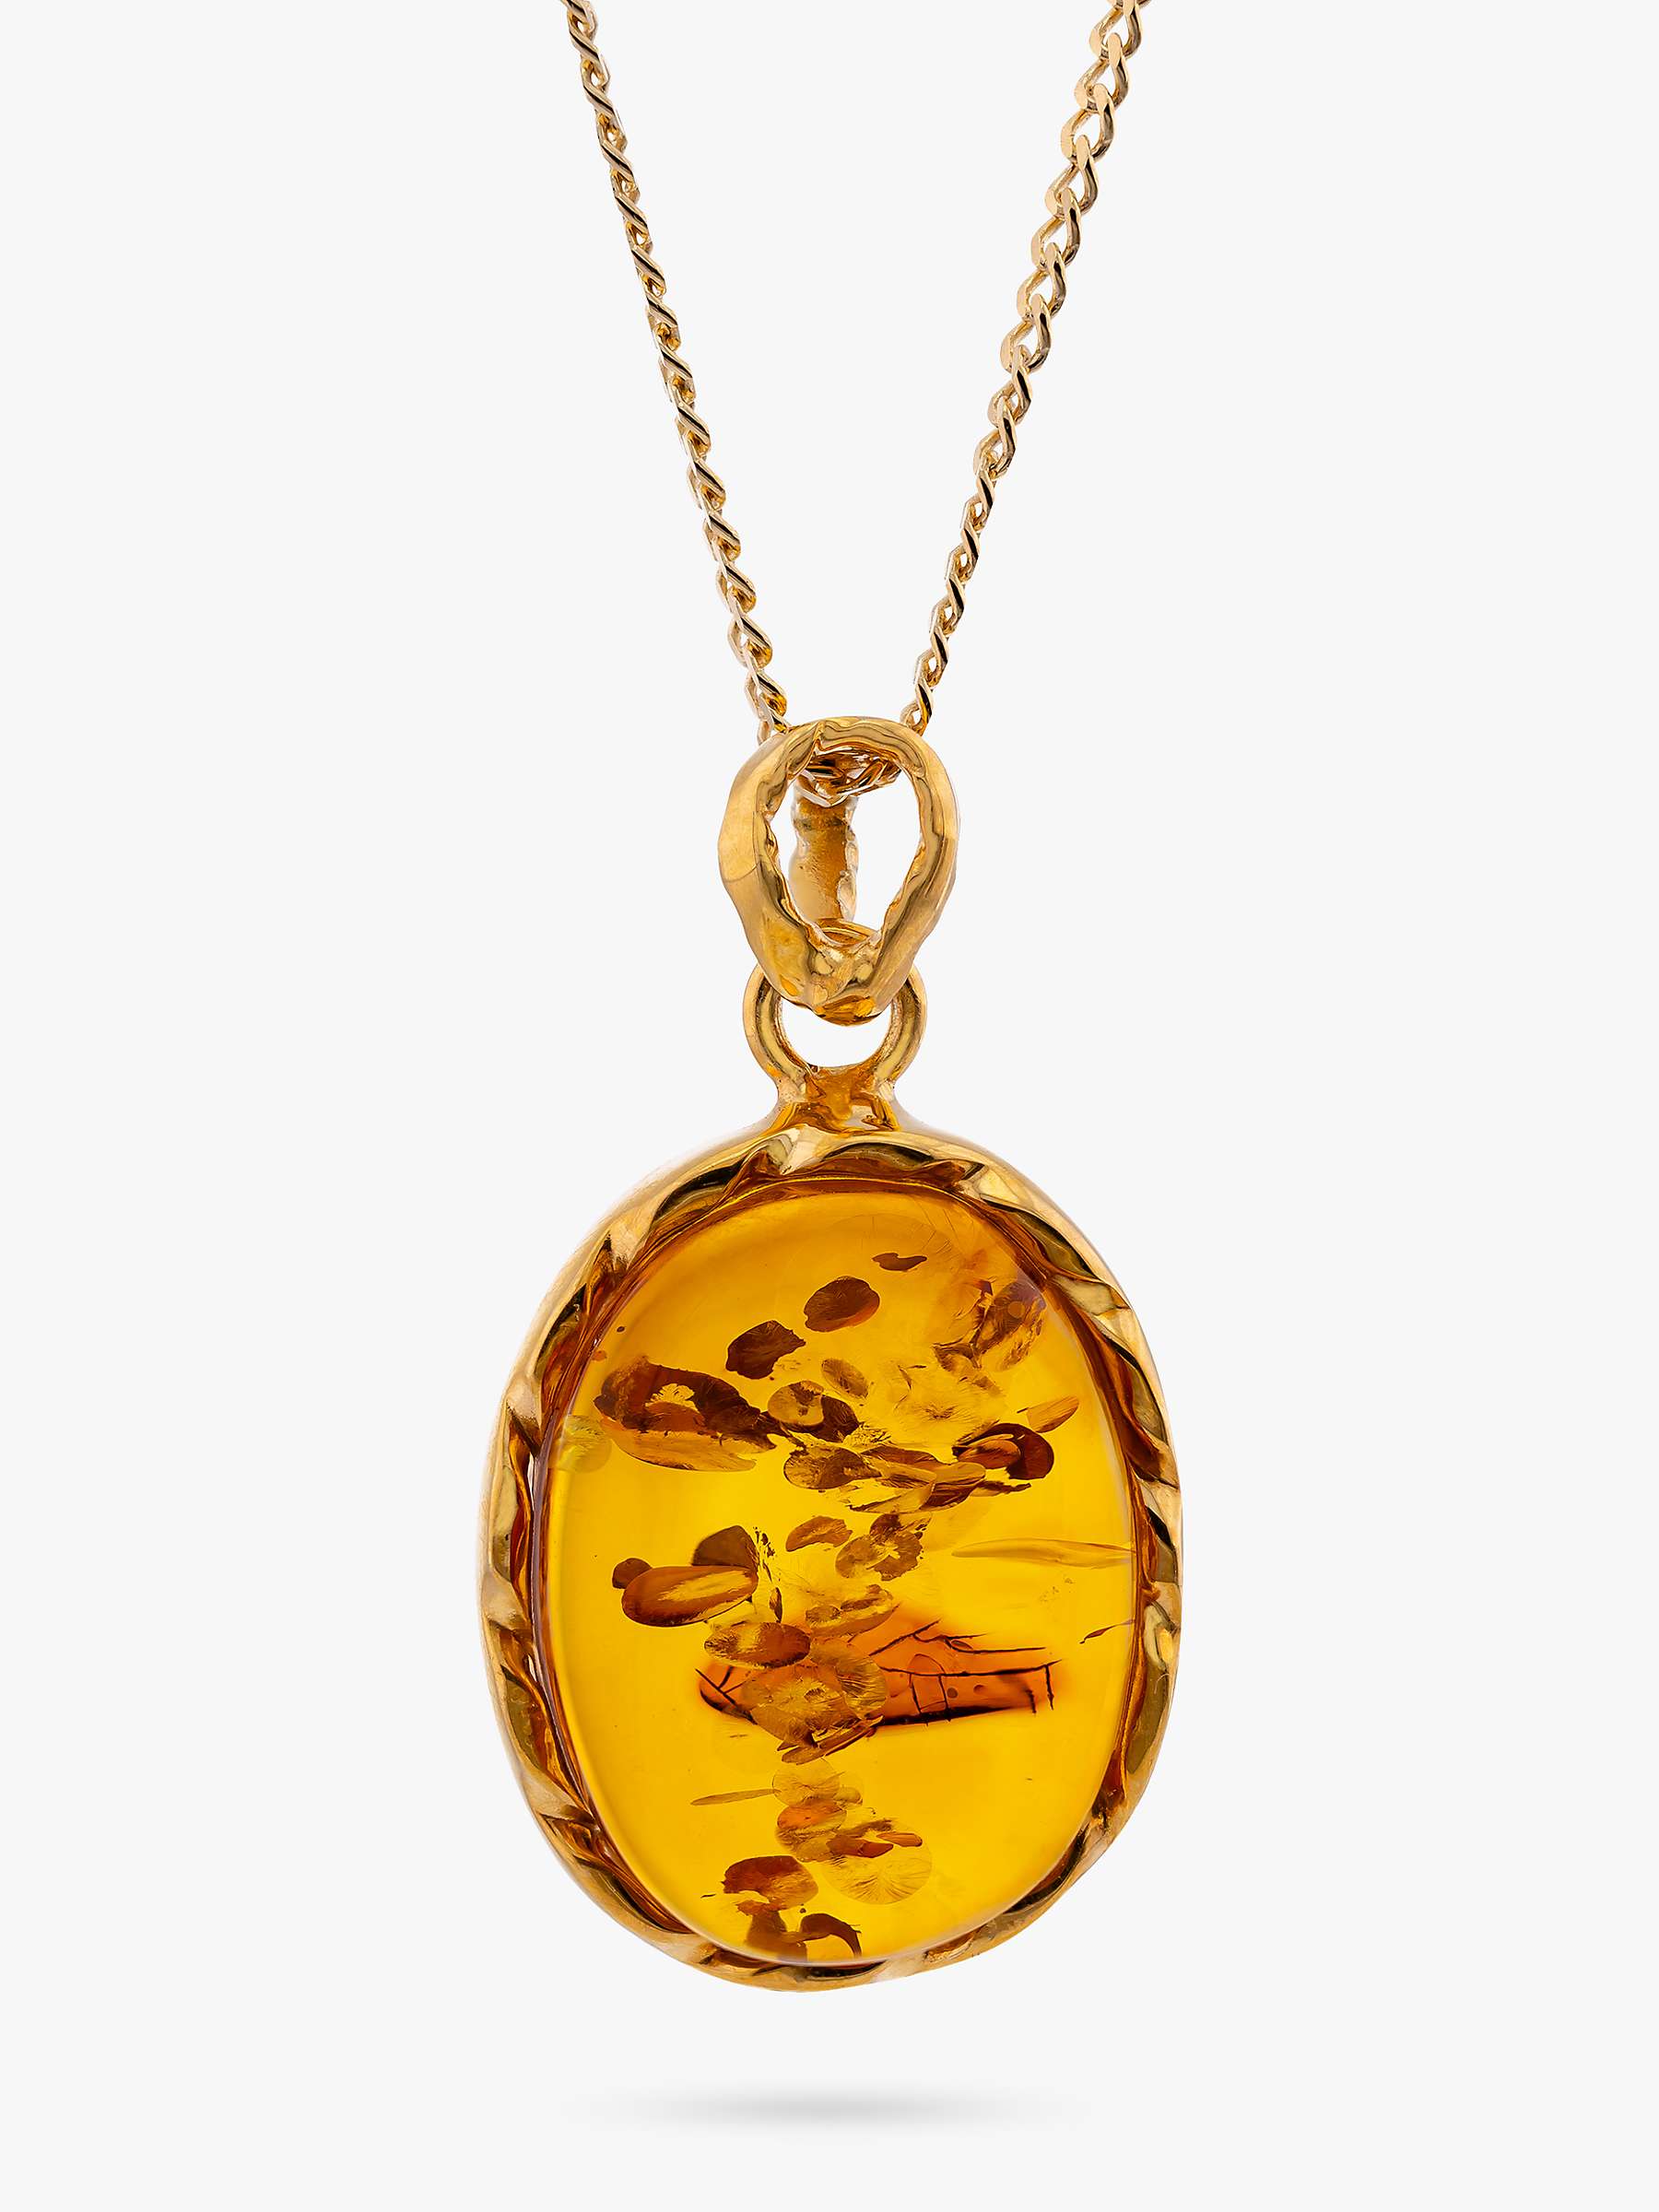 Buy Be-Jewelled Baltic Amber Pendant Necklace, Gold/Cognac Online at johnlewis.com